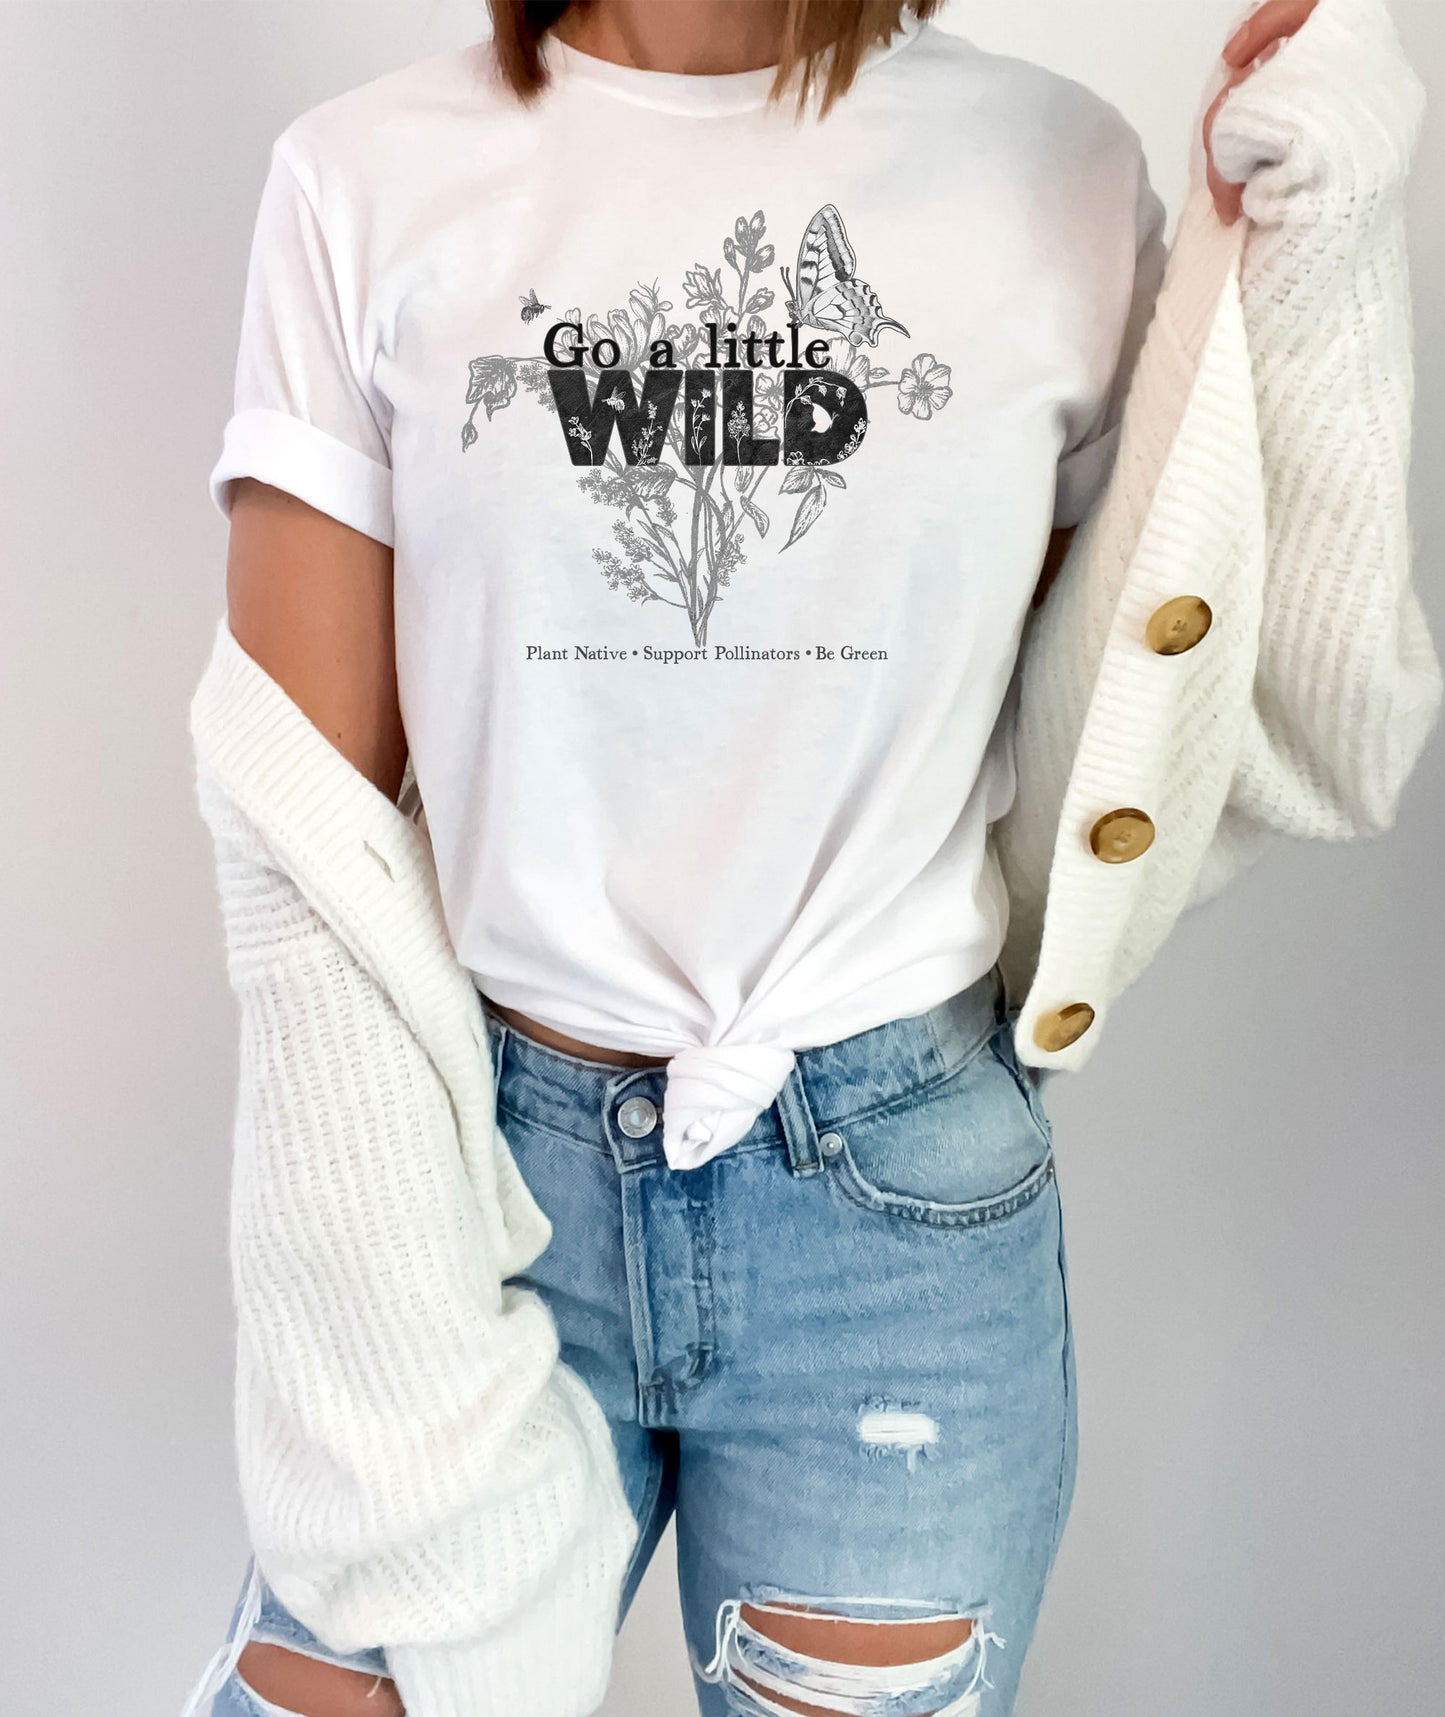 Go a Little Wild shirt, Native Plants, Go green, Save the Bees, Conservation, Nature Shirt, Naturalist habitat tee, gift for gardener